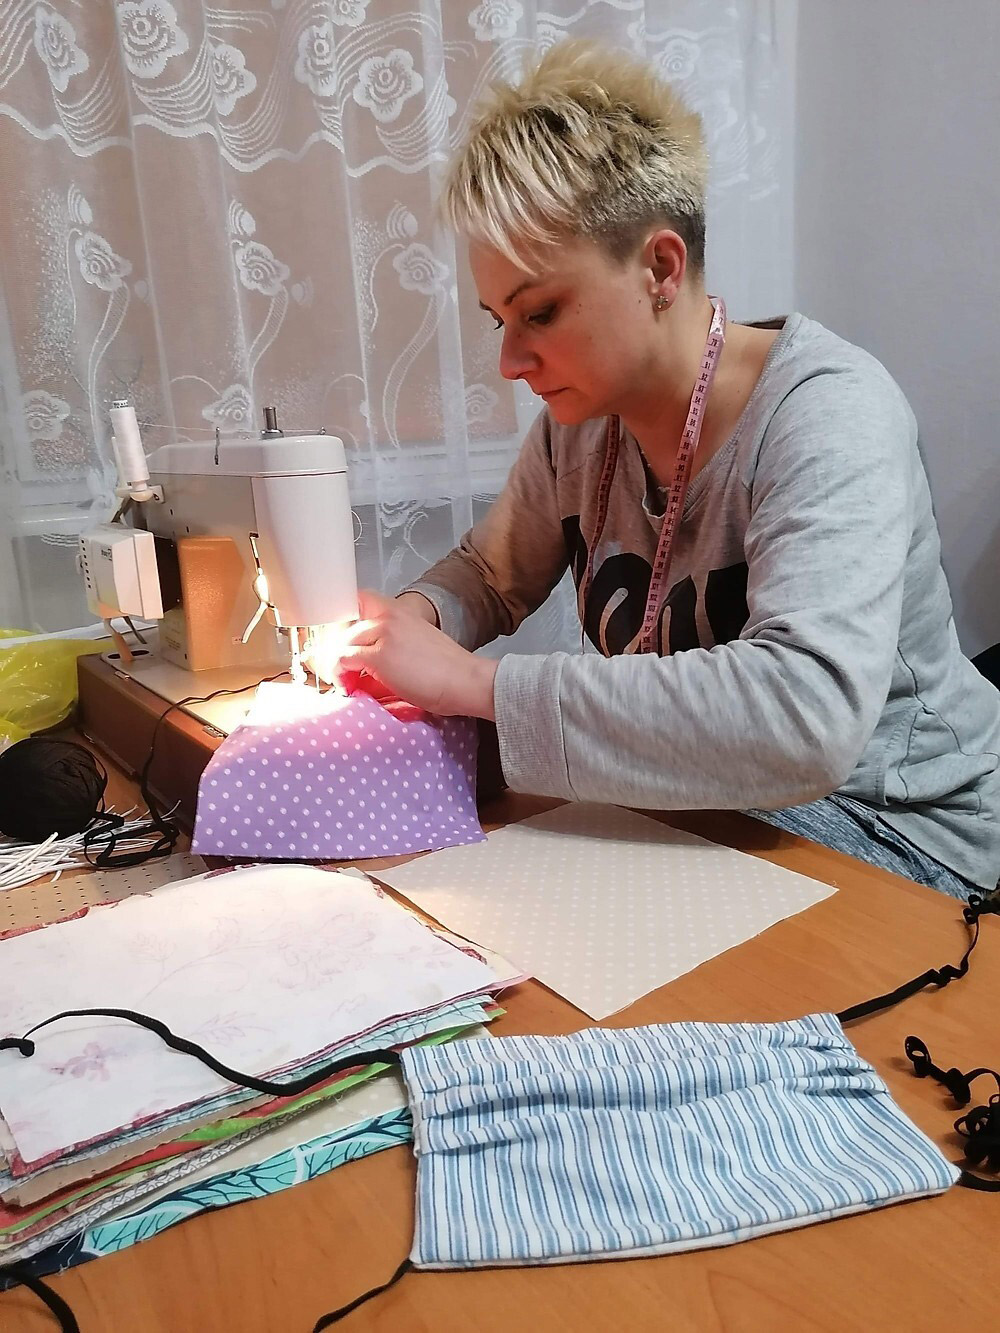 Making masks for a local hospital in Slupsk in an effort coordinated by the local Visible Hand group.